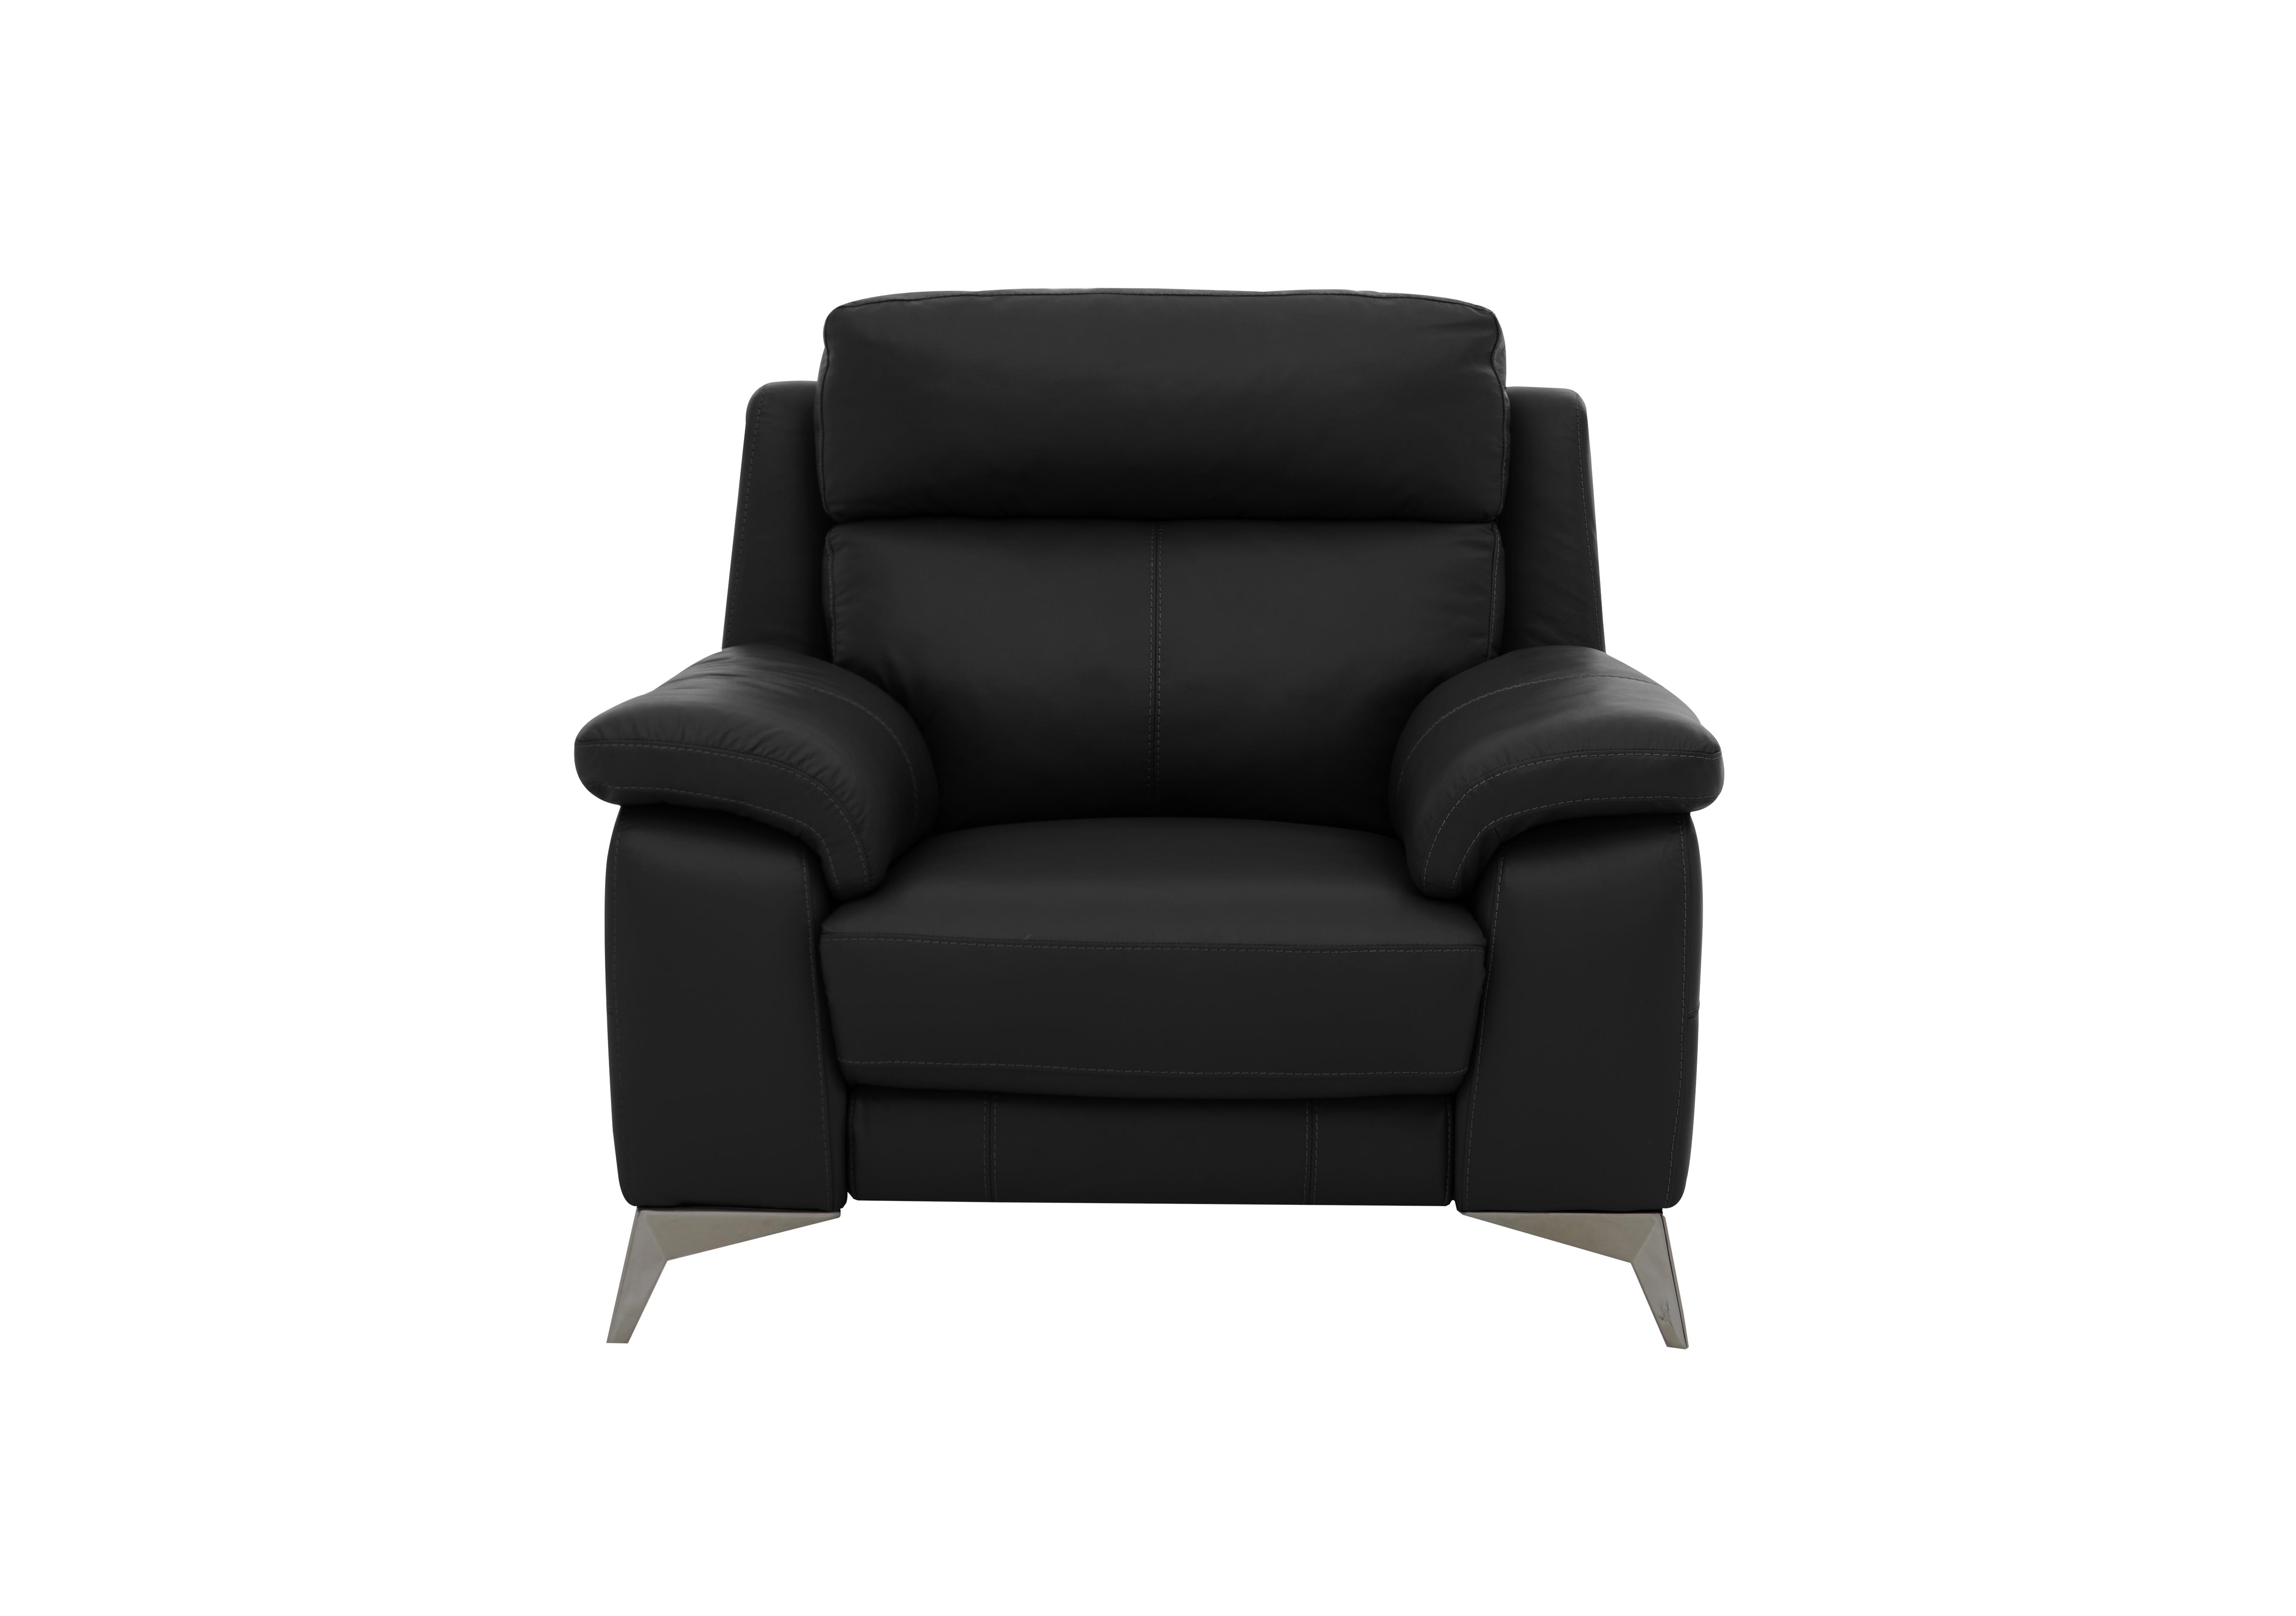 Missouri Leather Recliner Armchair with Power Headrest in Bv-3500 Classic Black on Furniture Village